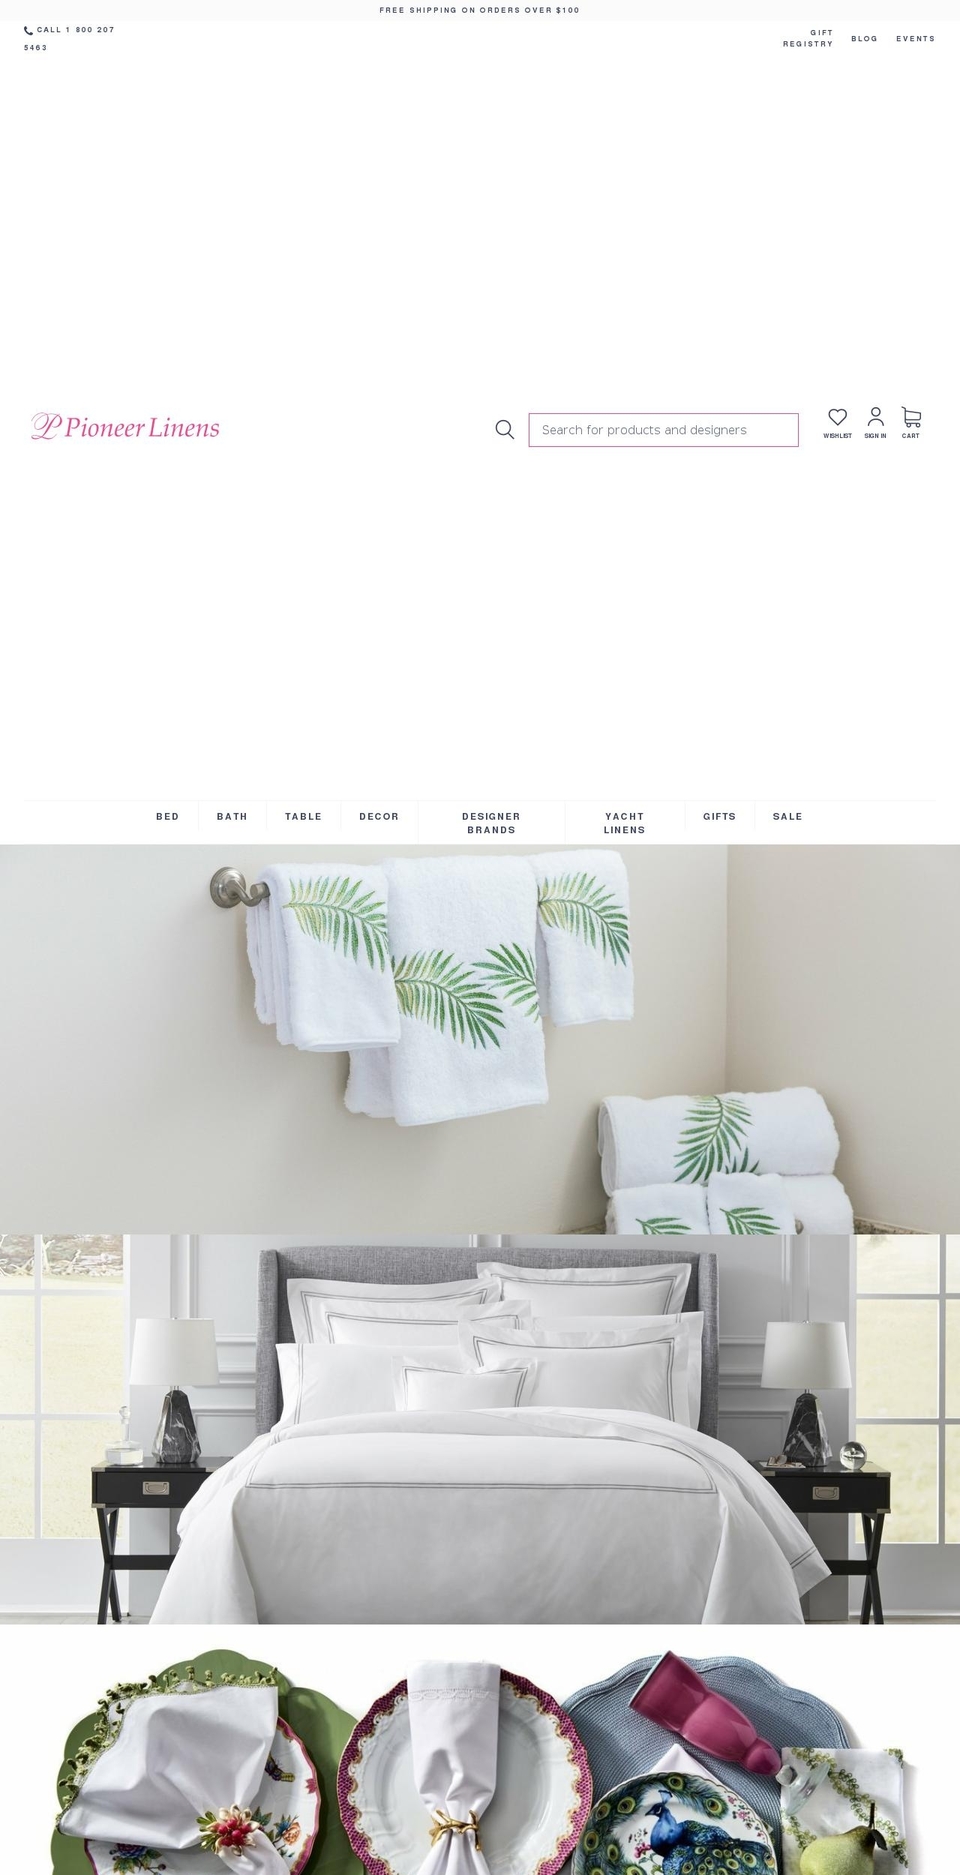 Buko Shopify Theme - Products Consolidation Shopify theme site example fortlauderdalelinens.com